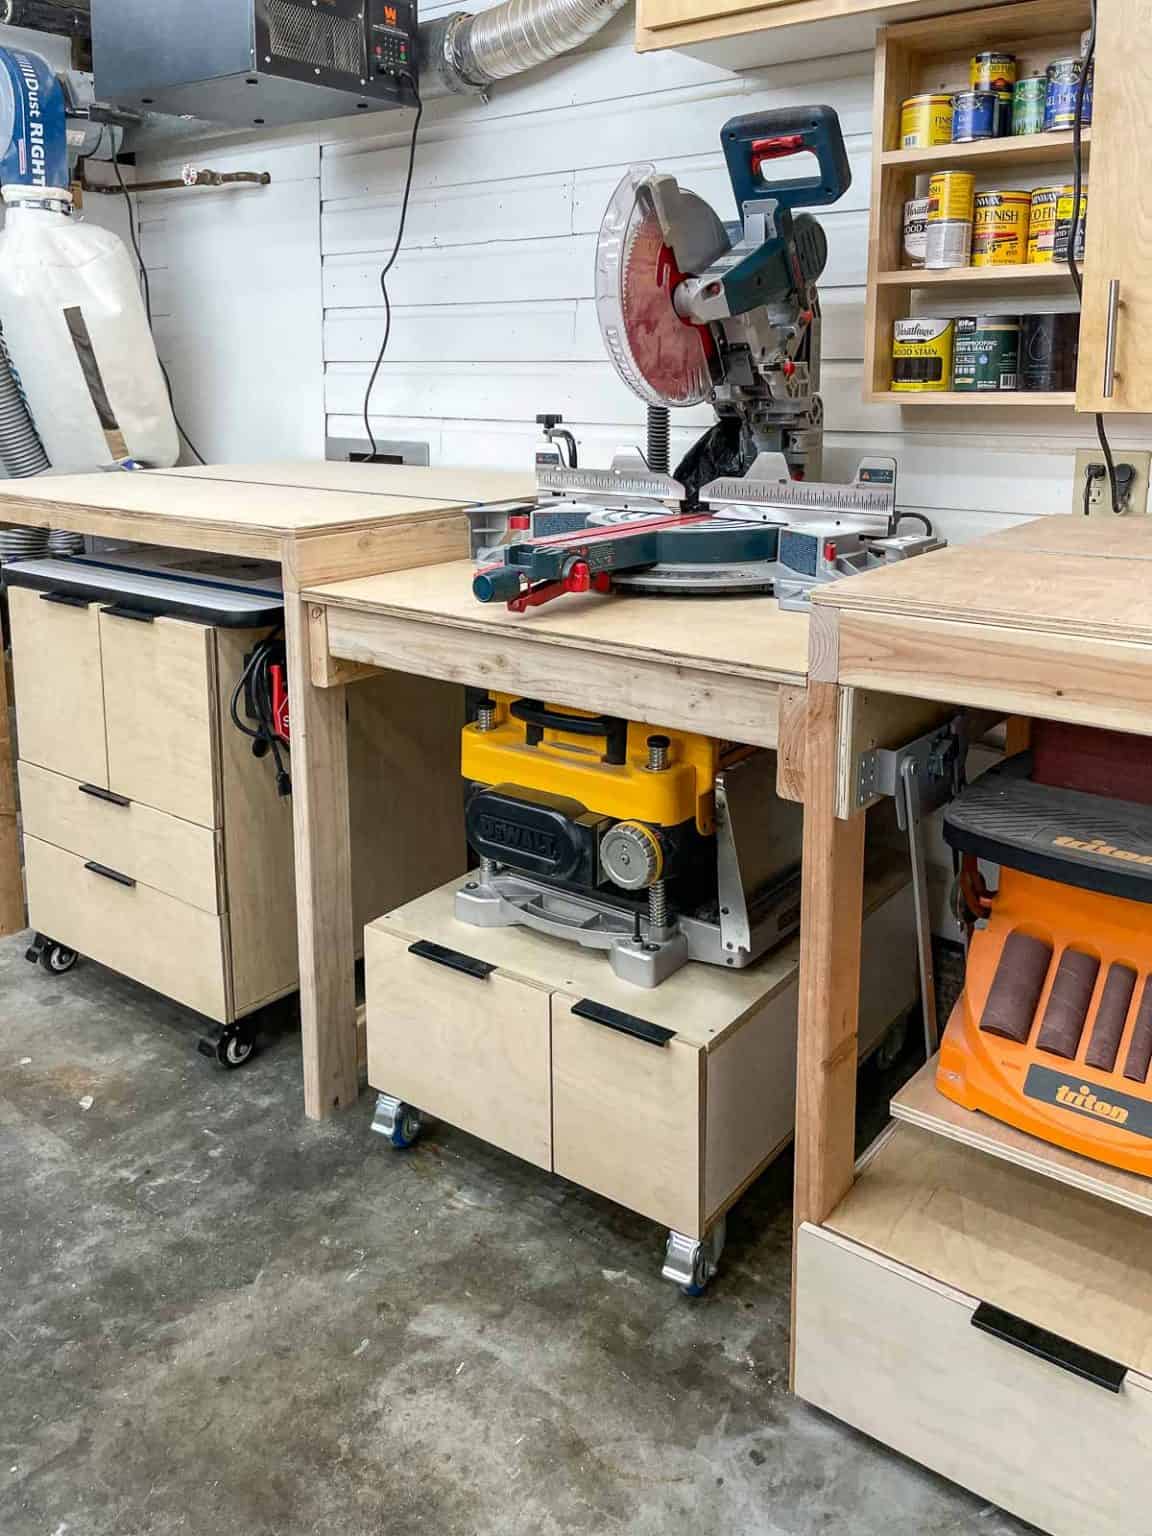 small router table